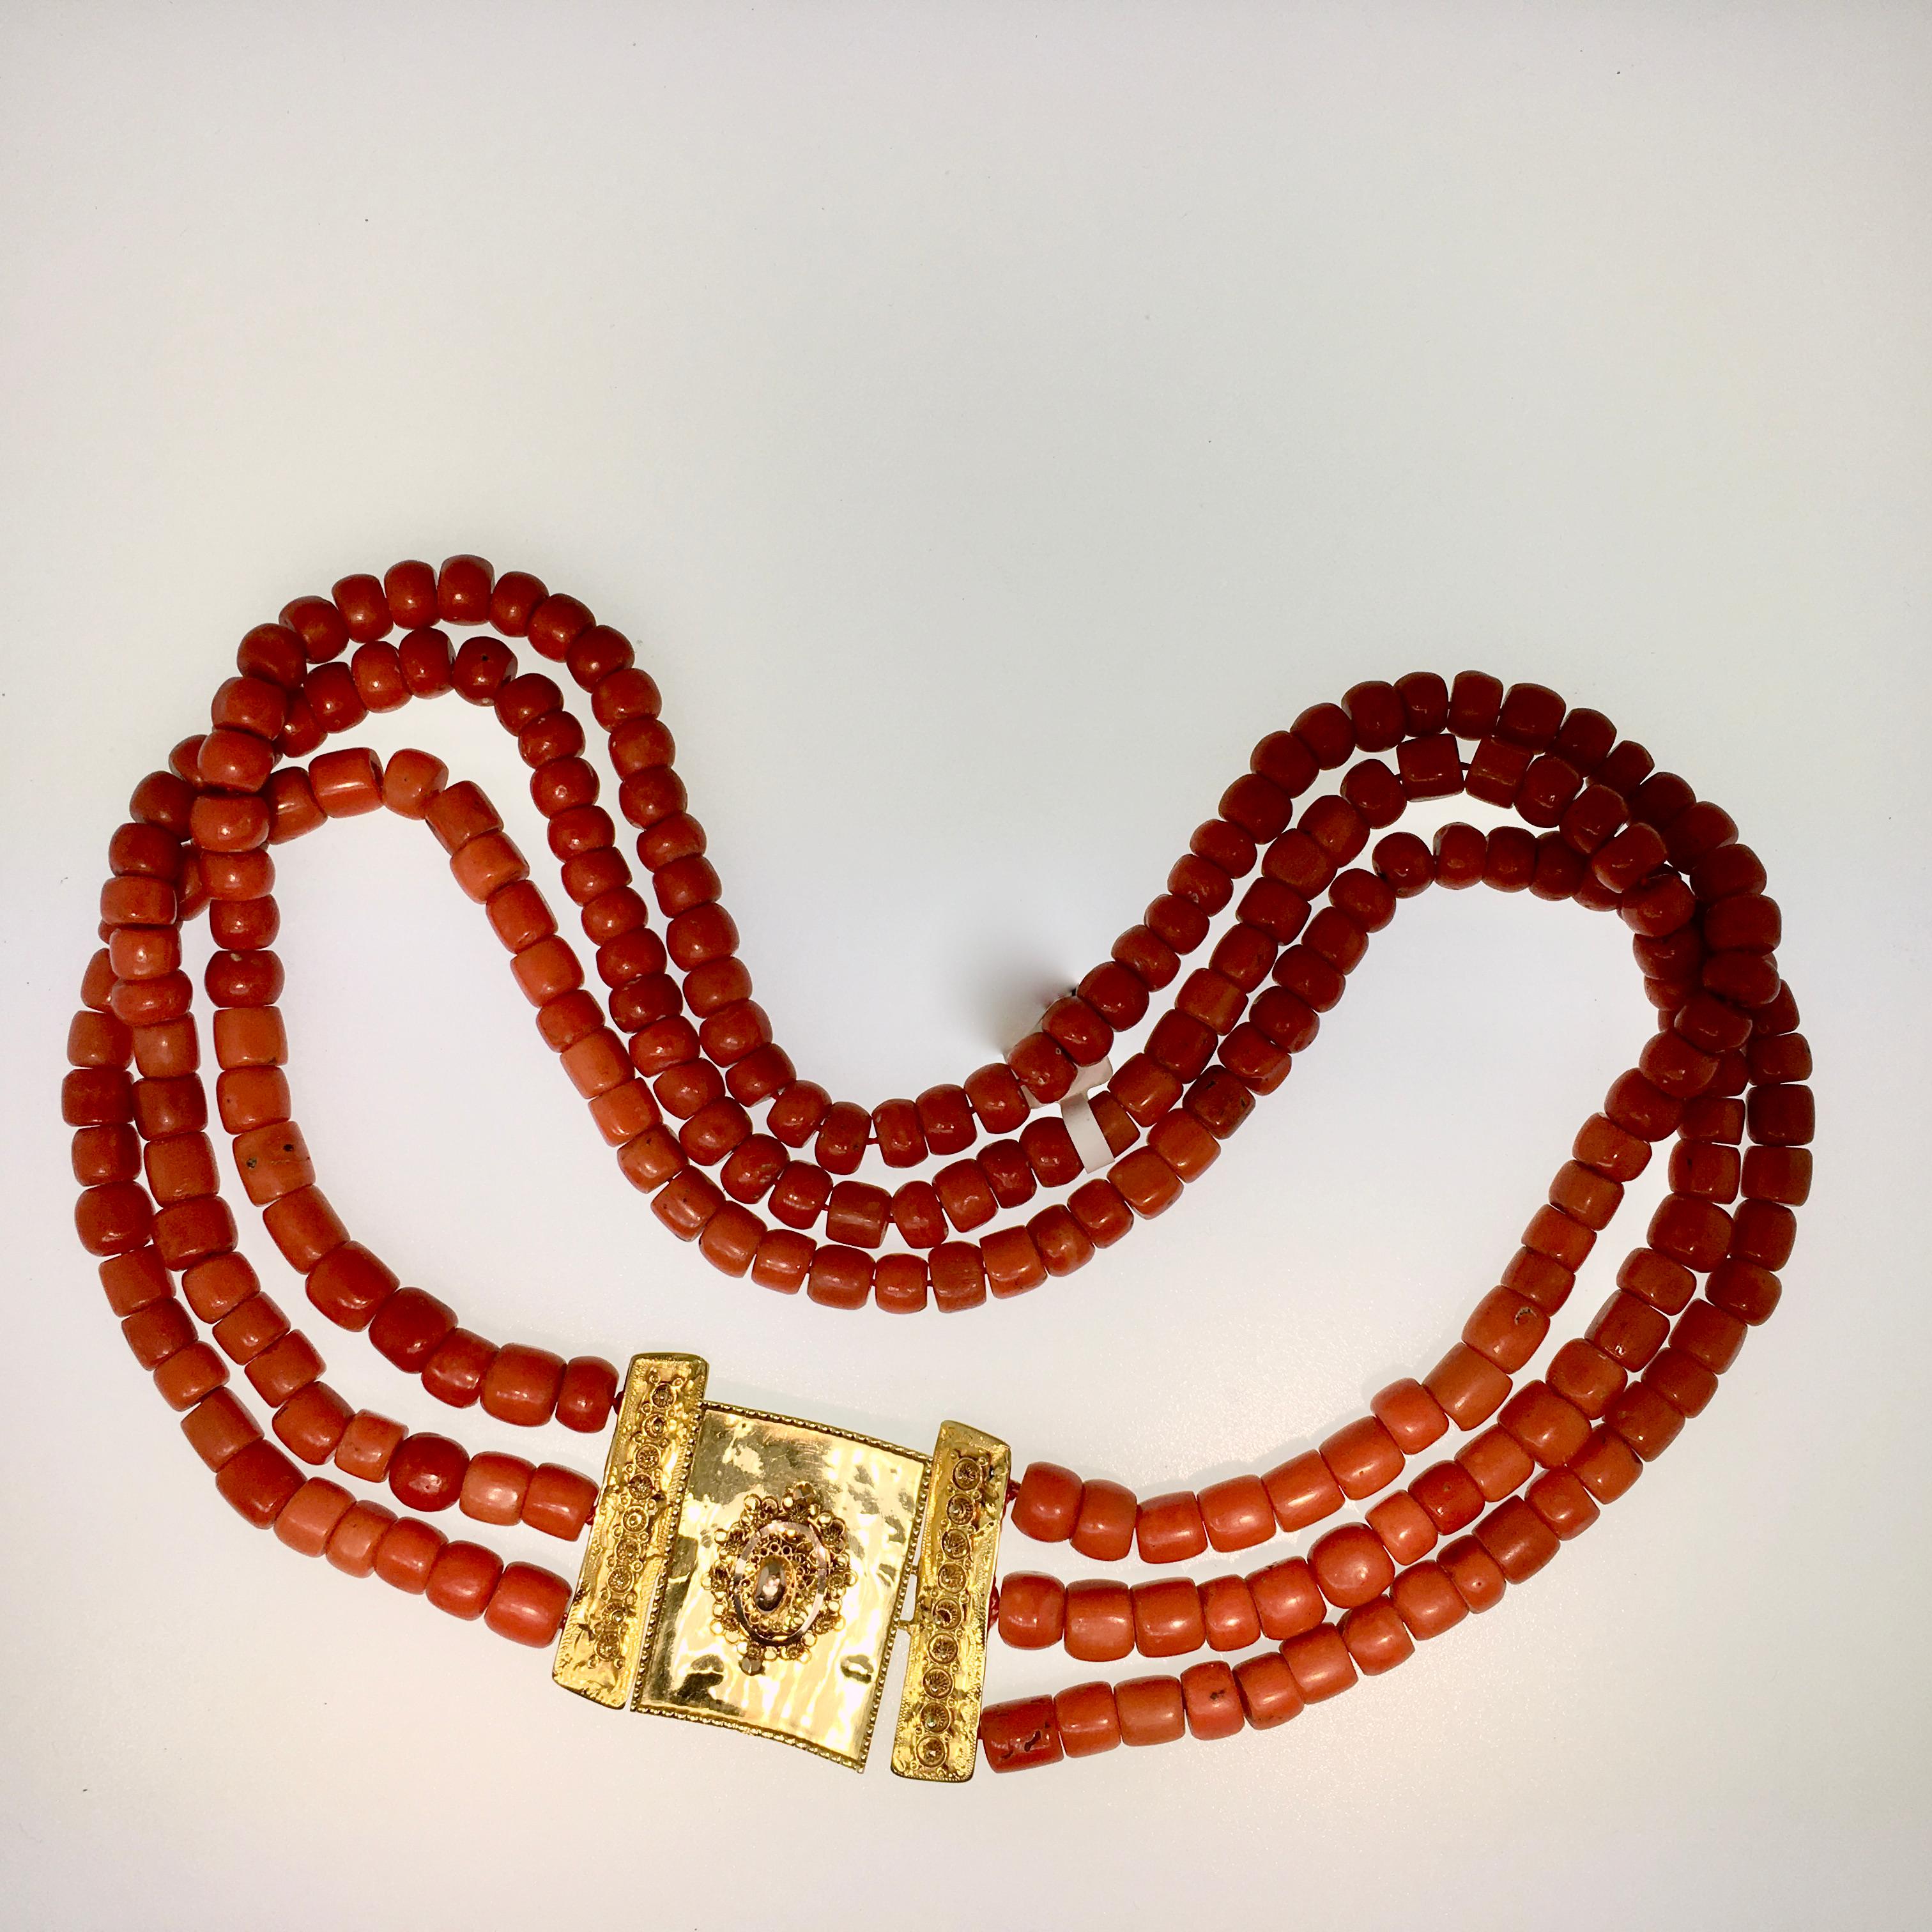 Bead Antique Coral, Necklace, 3-Strand, Yellow Gold, 1860, Dutch Costume Jewellery